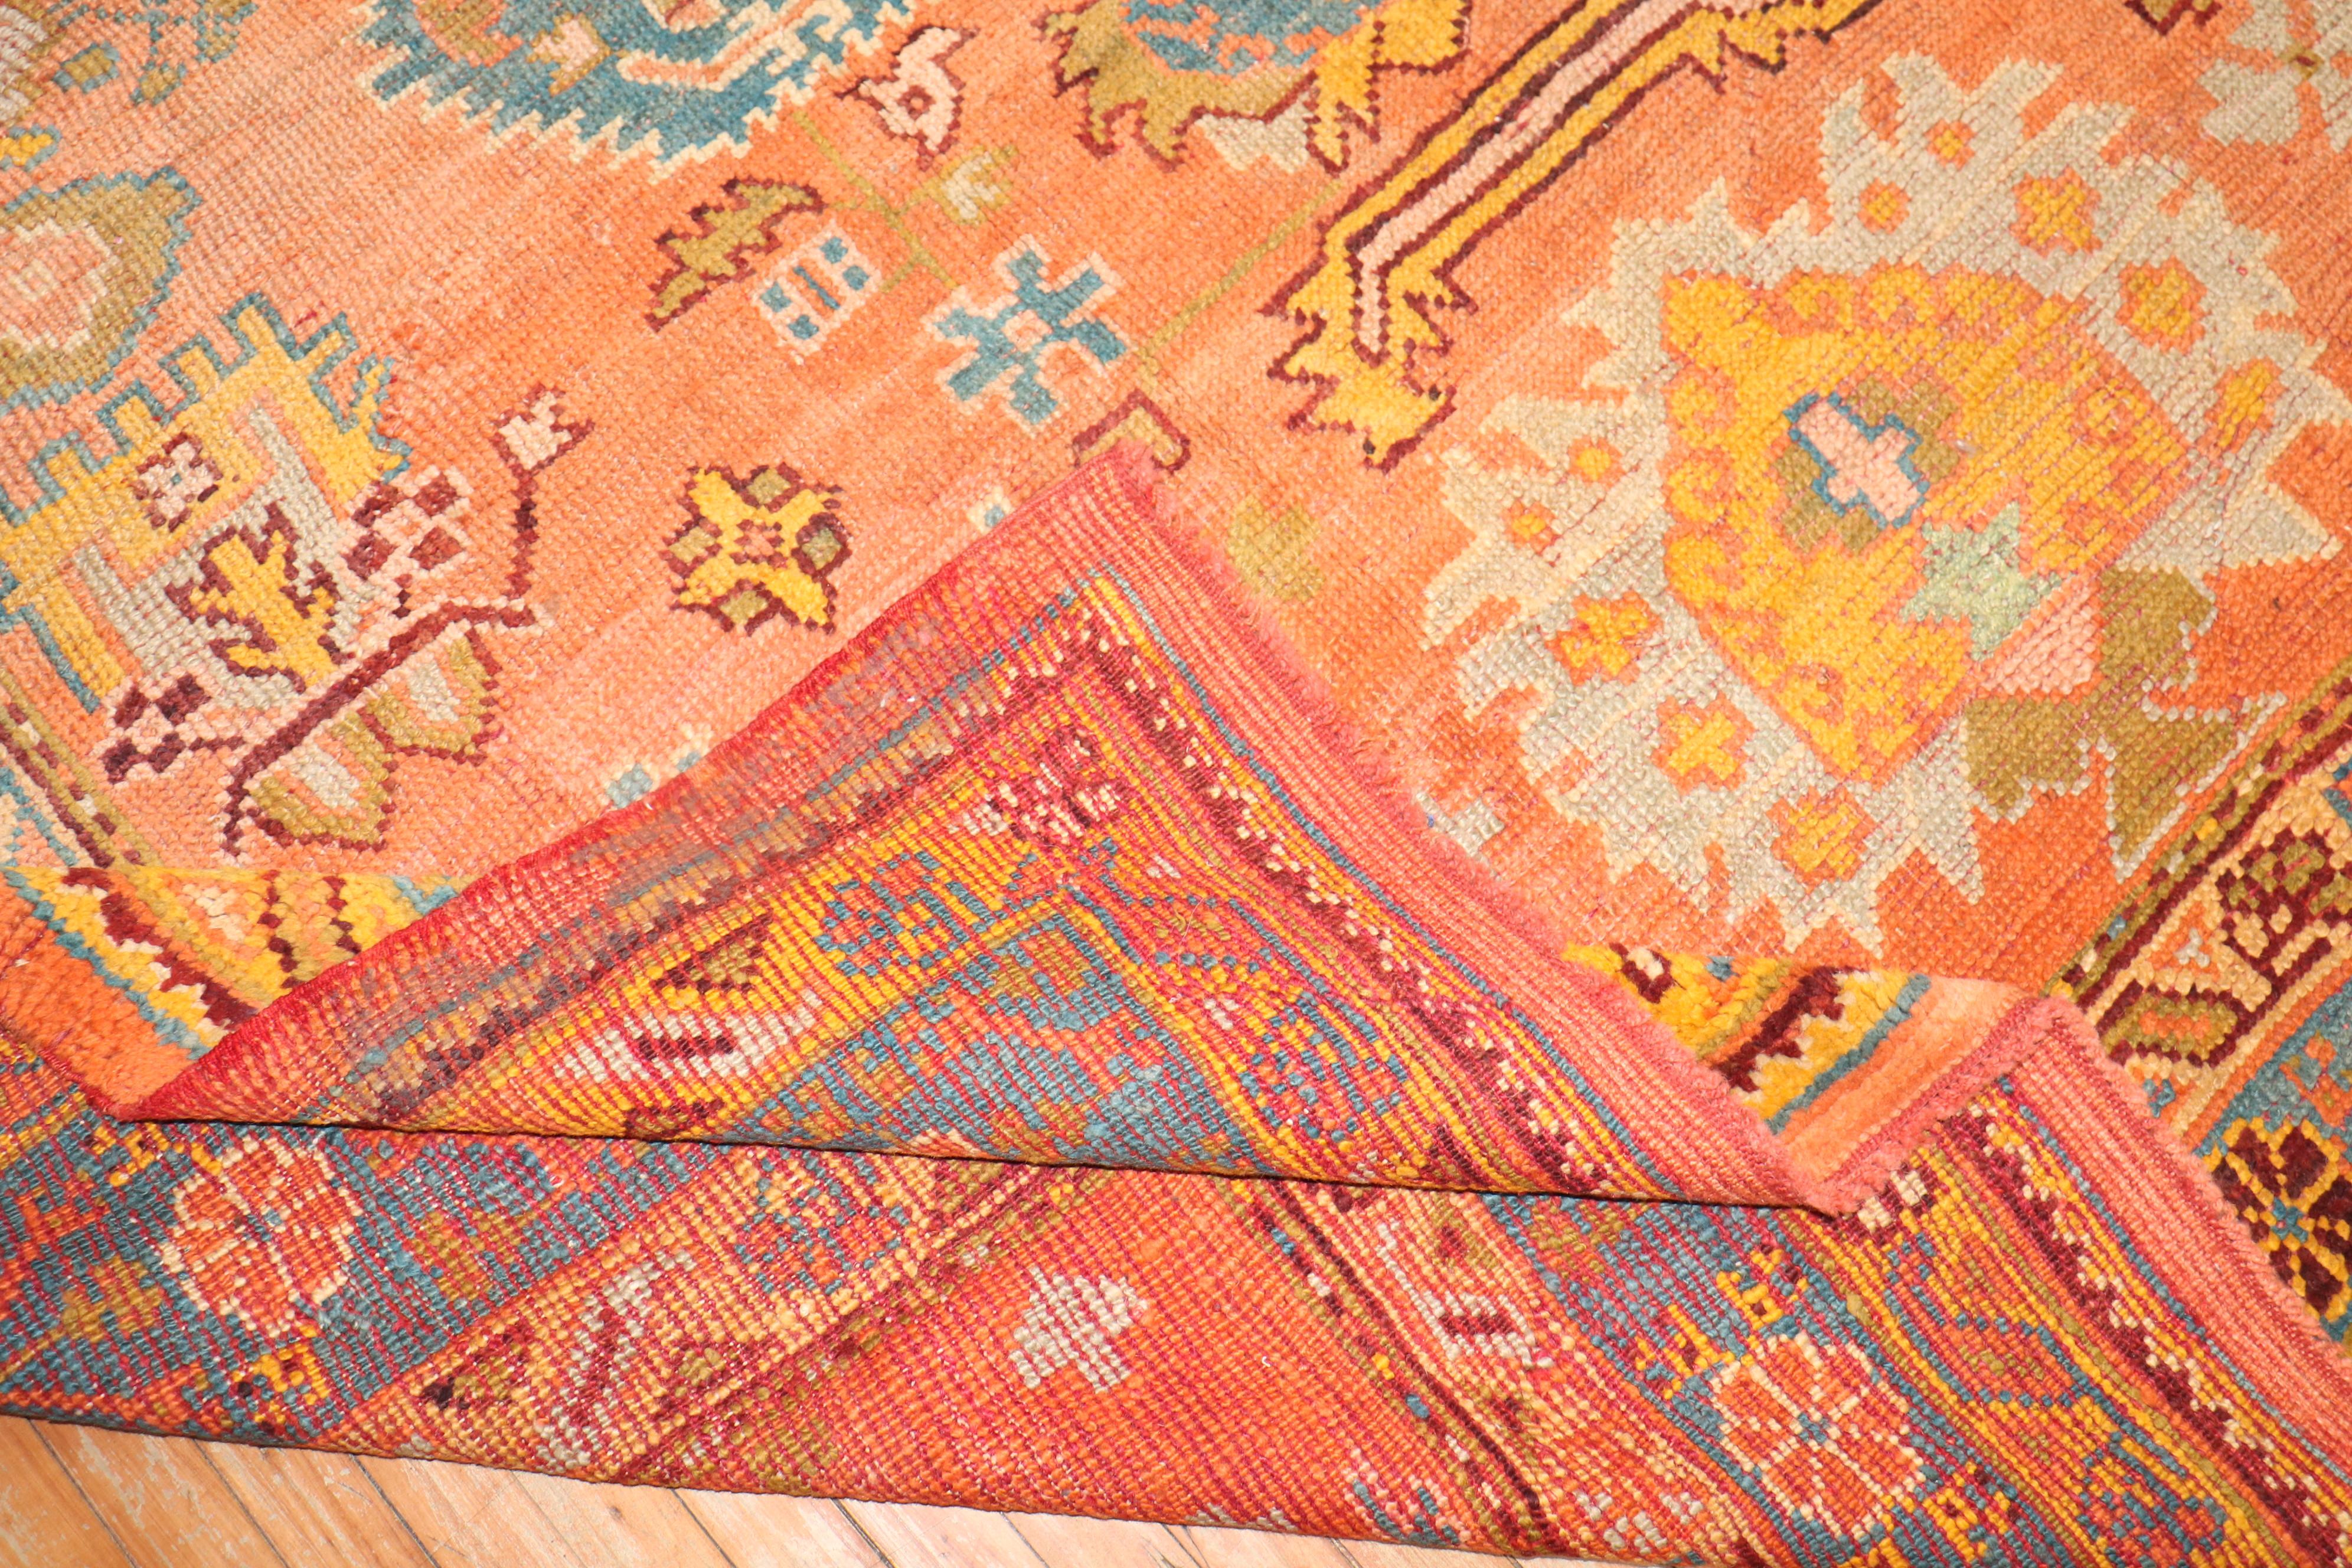 An early 20th-century orange field antique Oushak square rug

Measures: 9' x 10'9”.